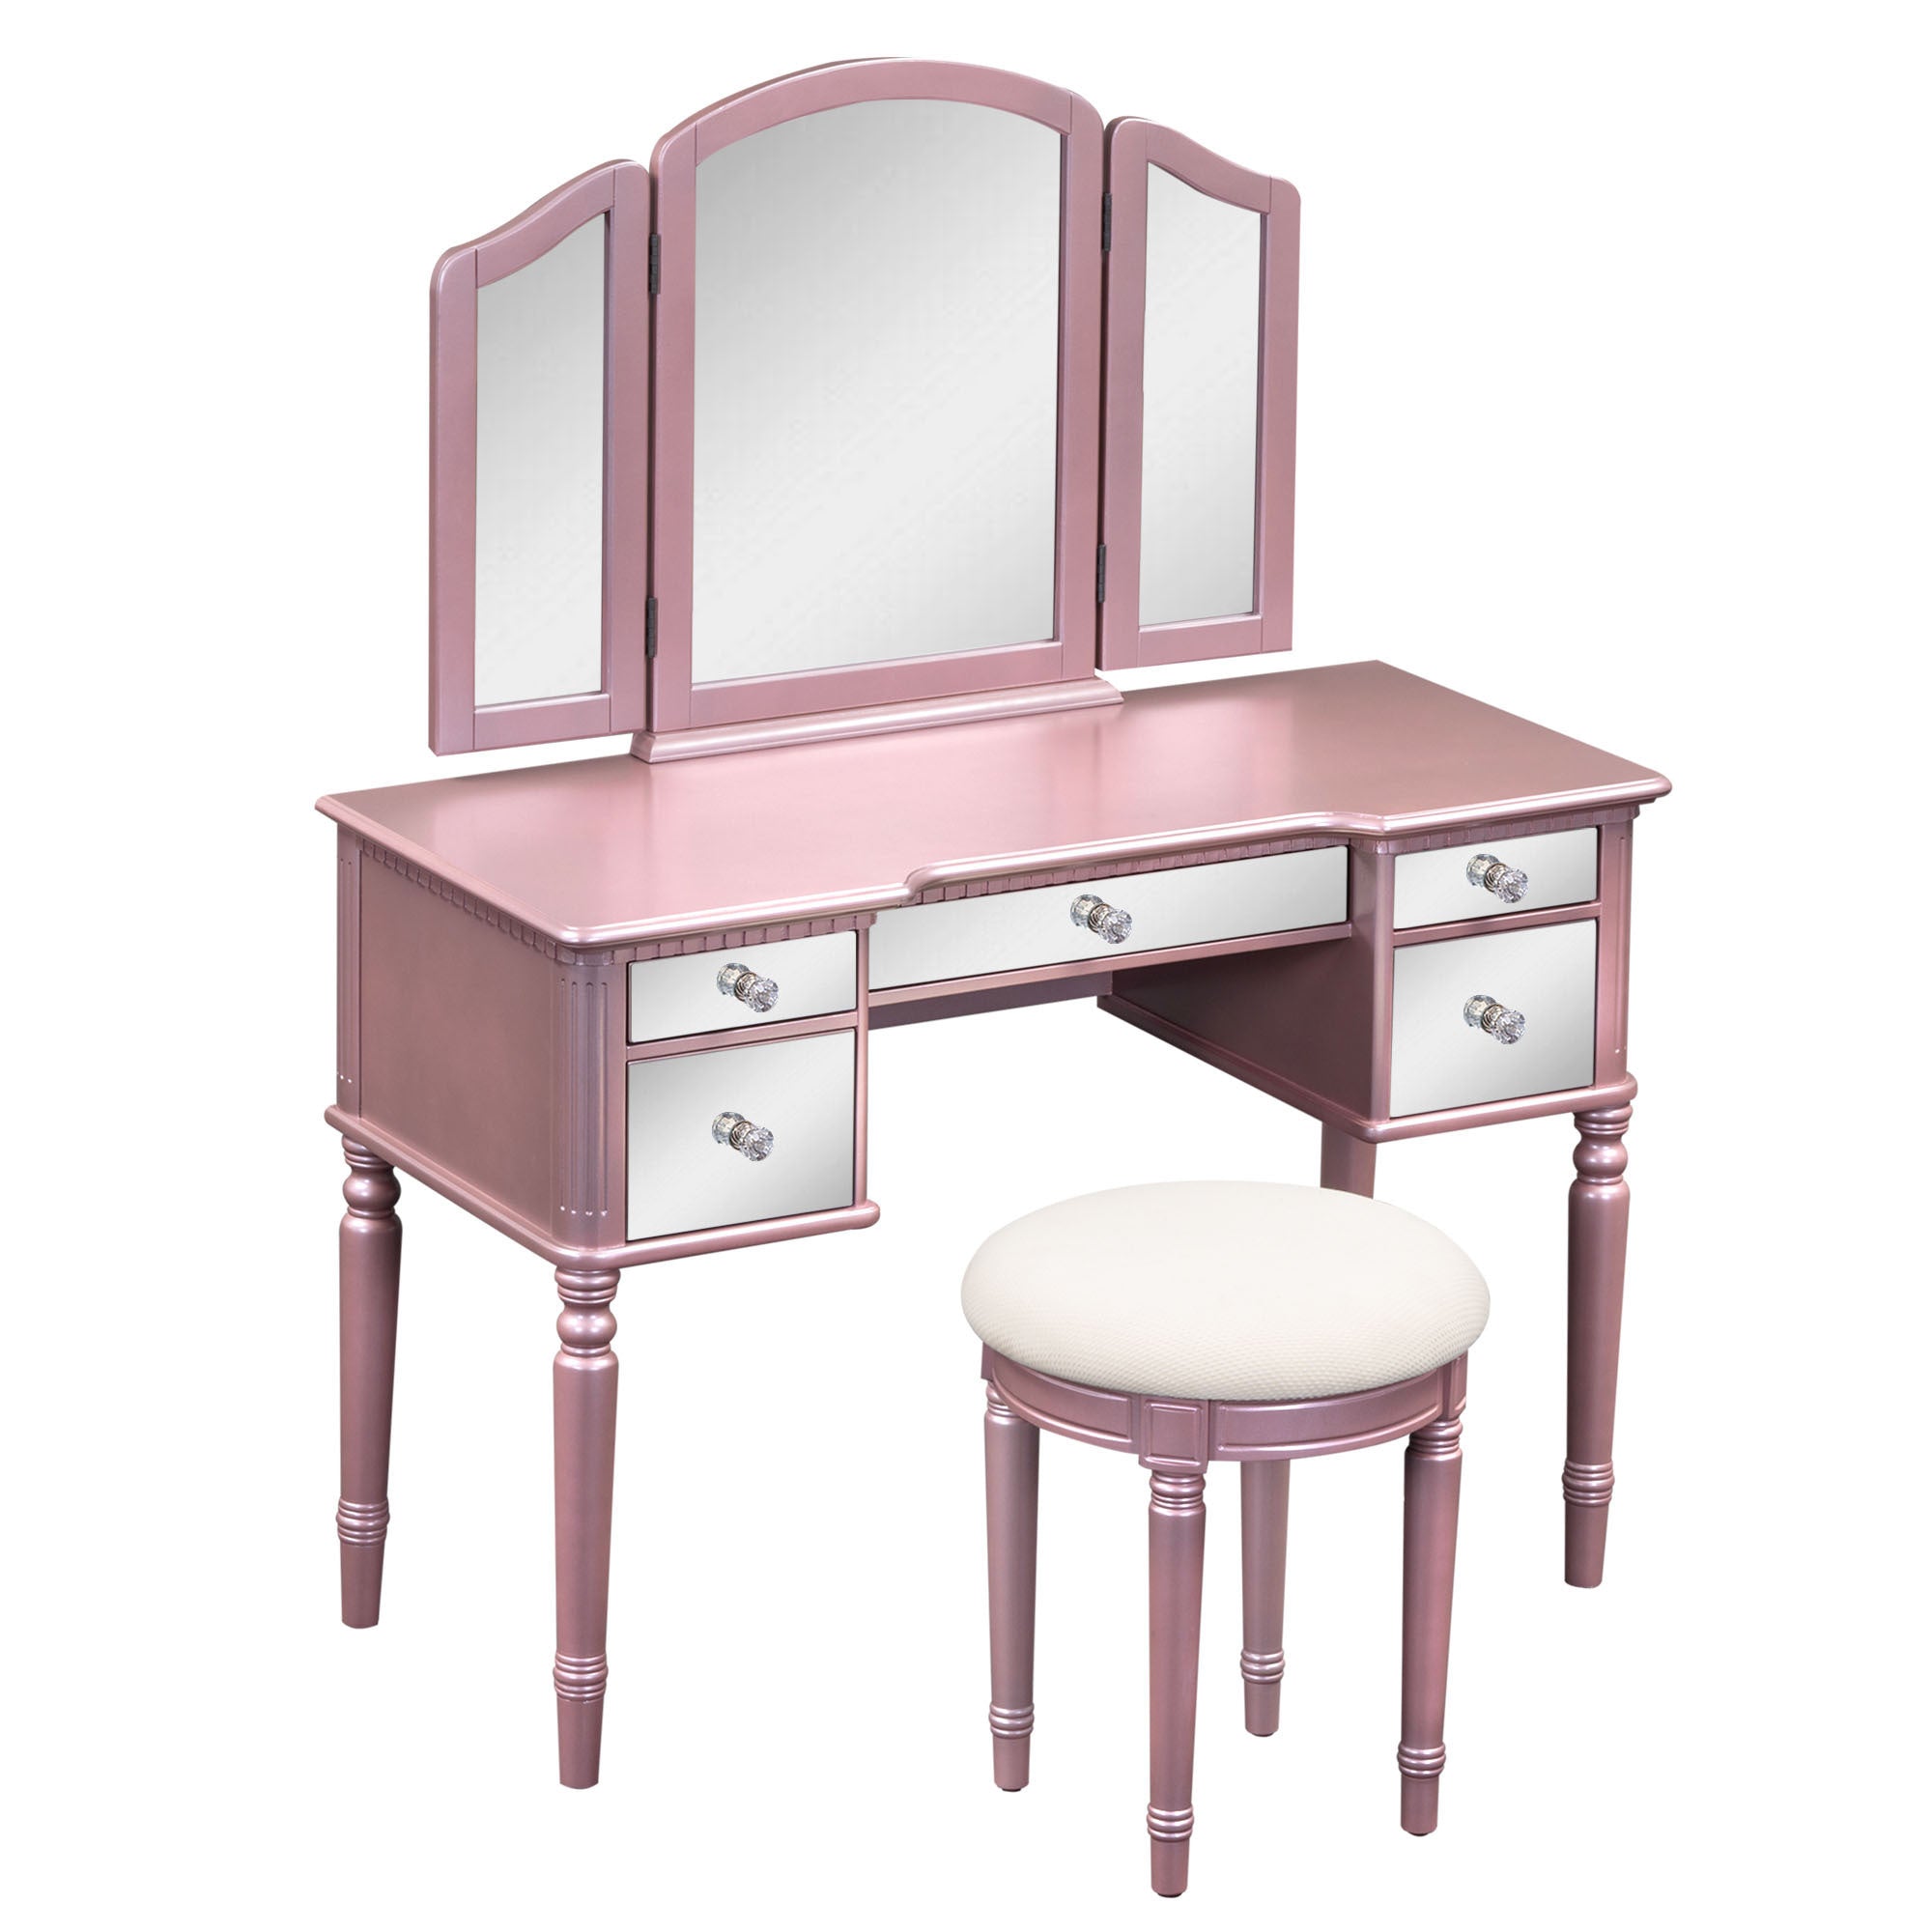 43" Makeup Vanity Set with Mirrored Drawers and Stool - Rose Gold